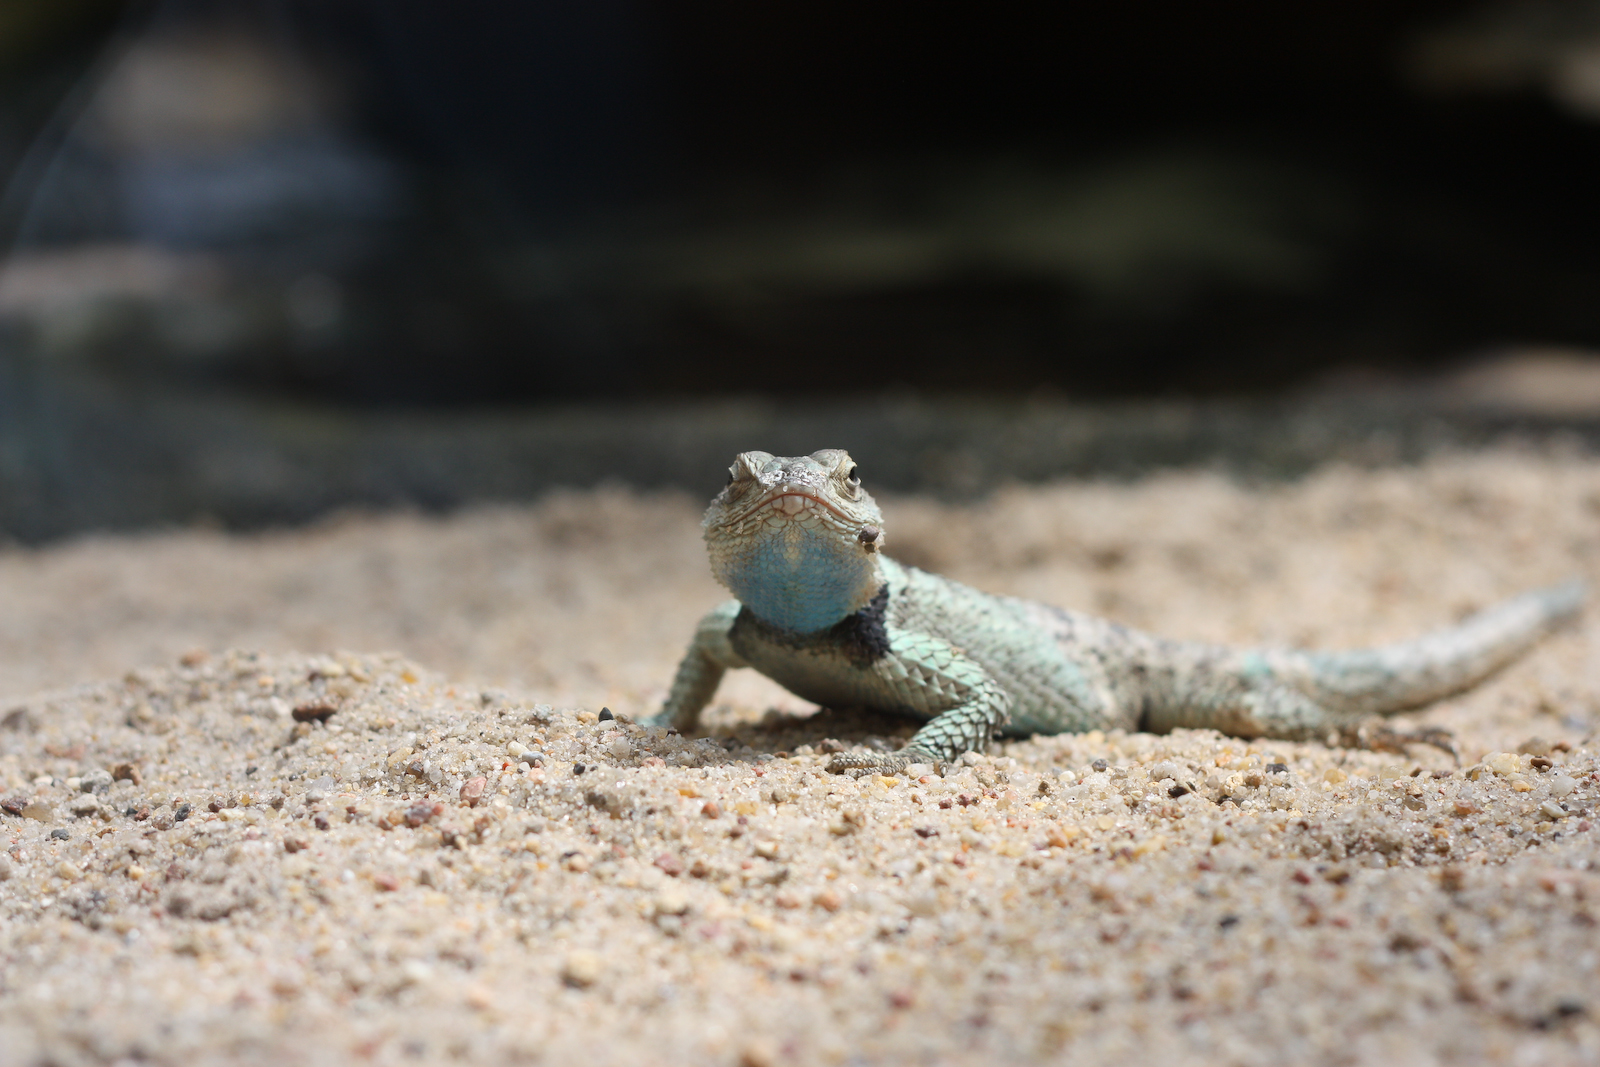 a small green lizard sitting on a sandy surface